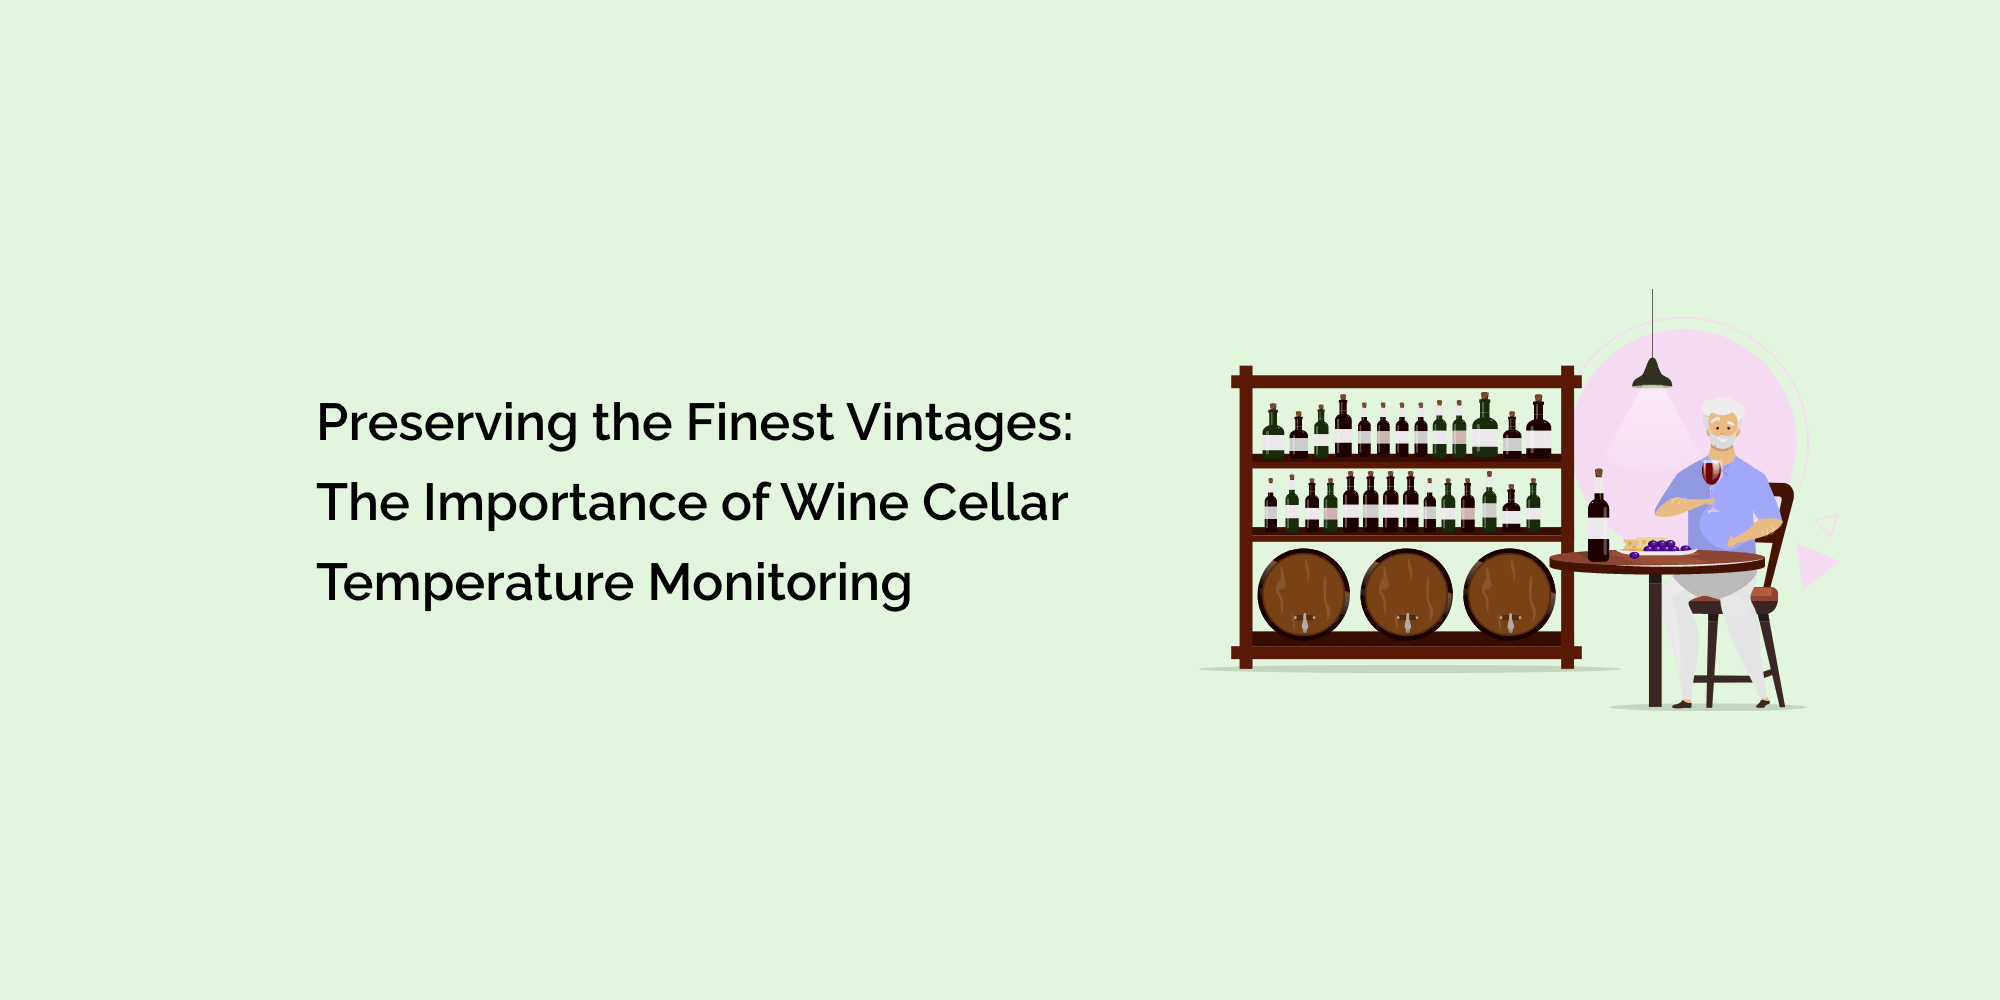 Fine-Tuning Your Wine Storage: Best Practices for Temperature and Humidity Monitoring